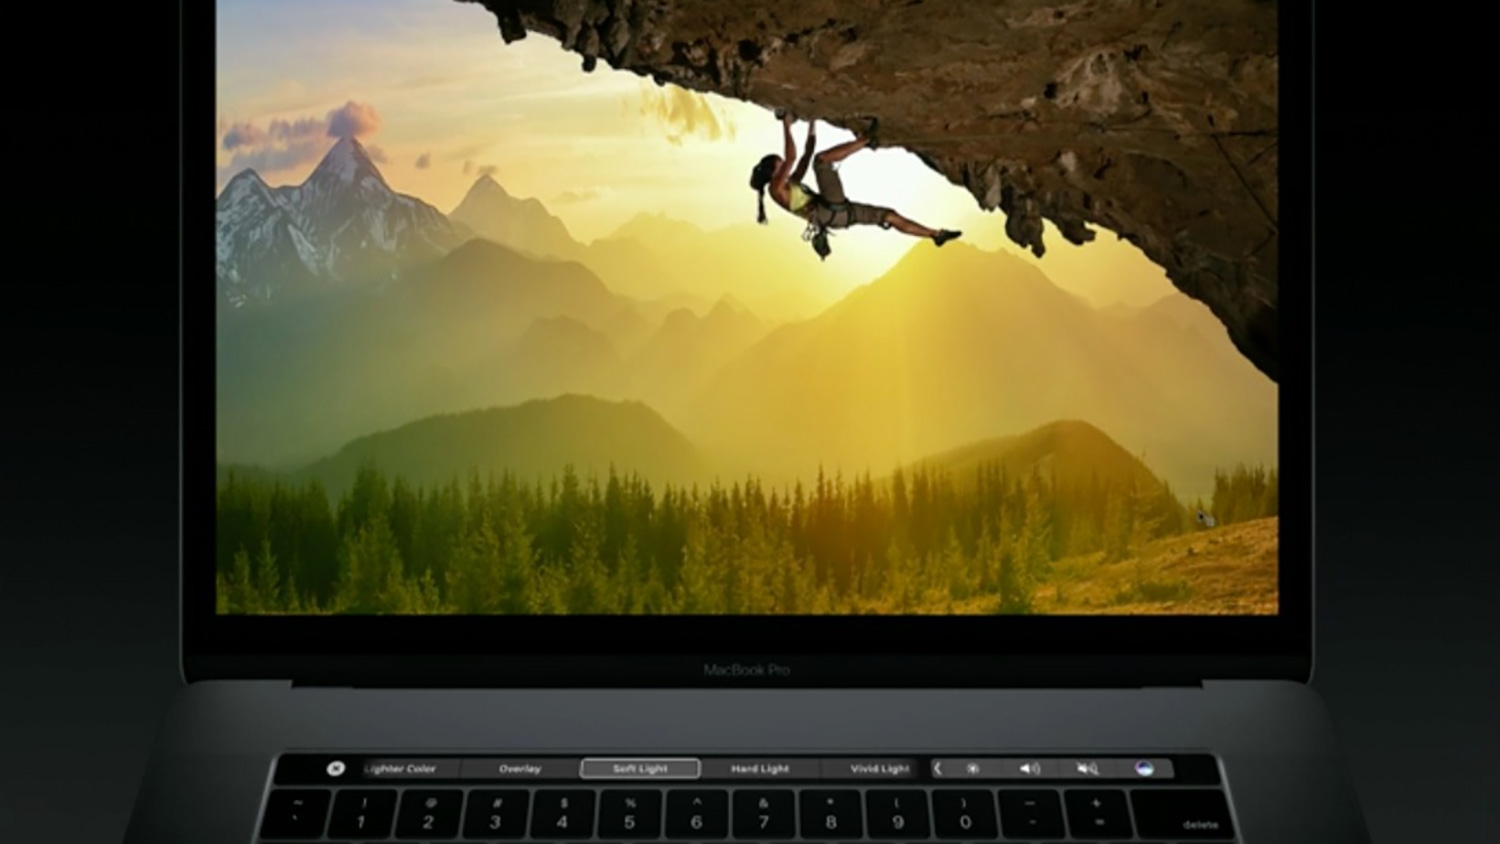 adobe photoshop for macbook pro free download